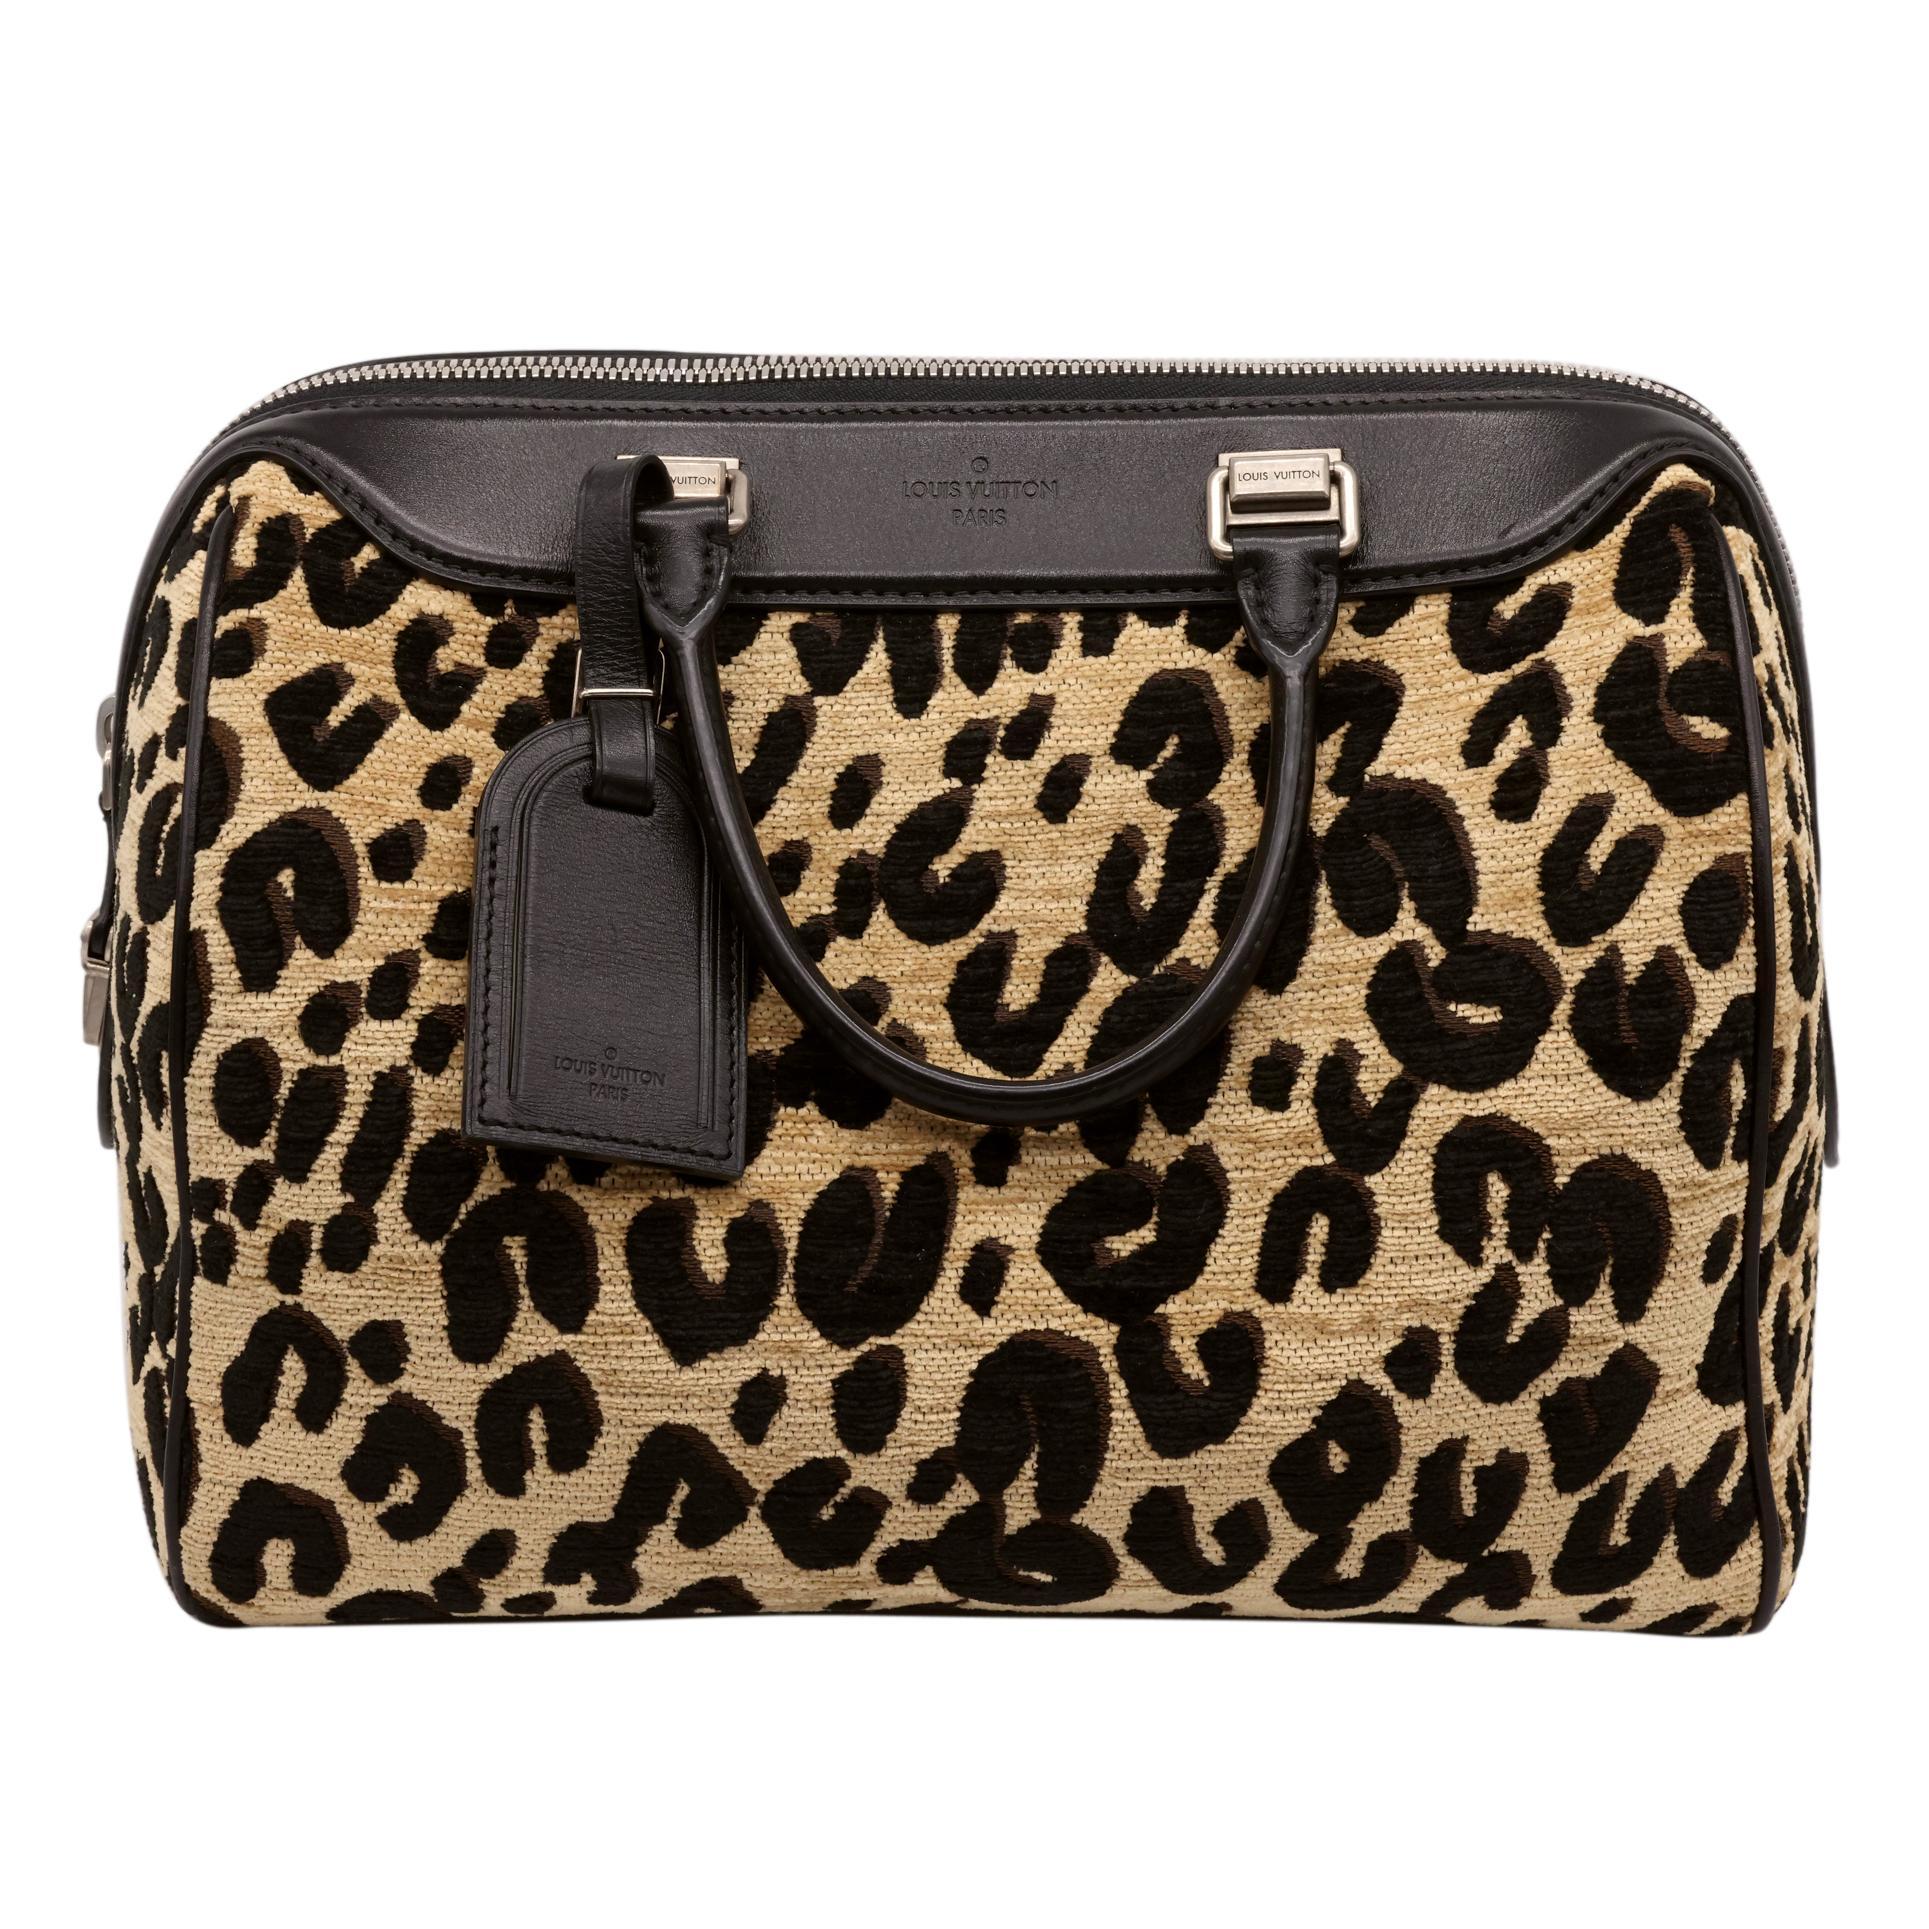 Limited Edition Louis Vuitton x Stephen Sprouse Leopard Speedy Bag, 2012 - 2013. In 2012, the iconic fashion house Louis Vuitton creative director Marc Jacobs collaborated with legendary designer and childhood inspiration, Stephen Sprouse. In the